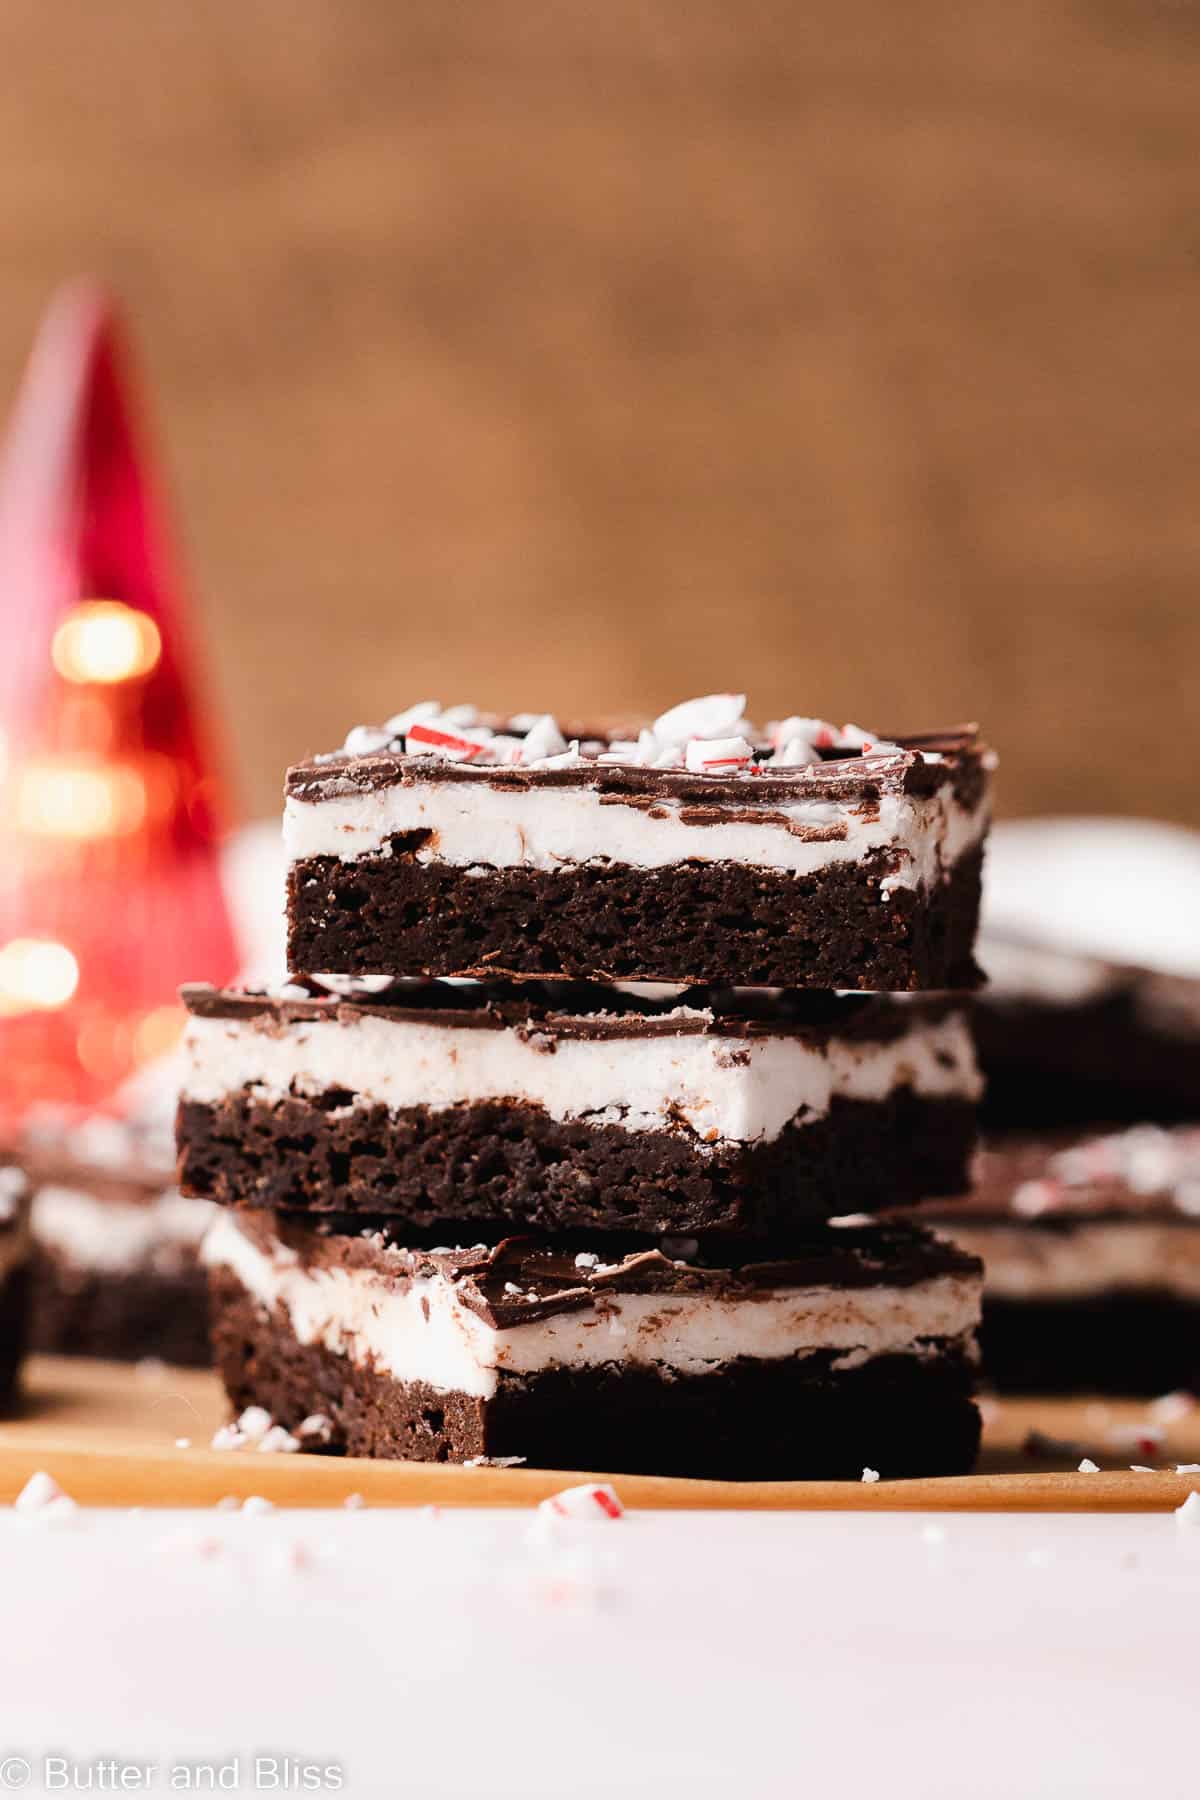 Small lopsided stack of gluten free peppermint patty brownies with candy cane sprinkles.